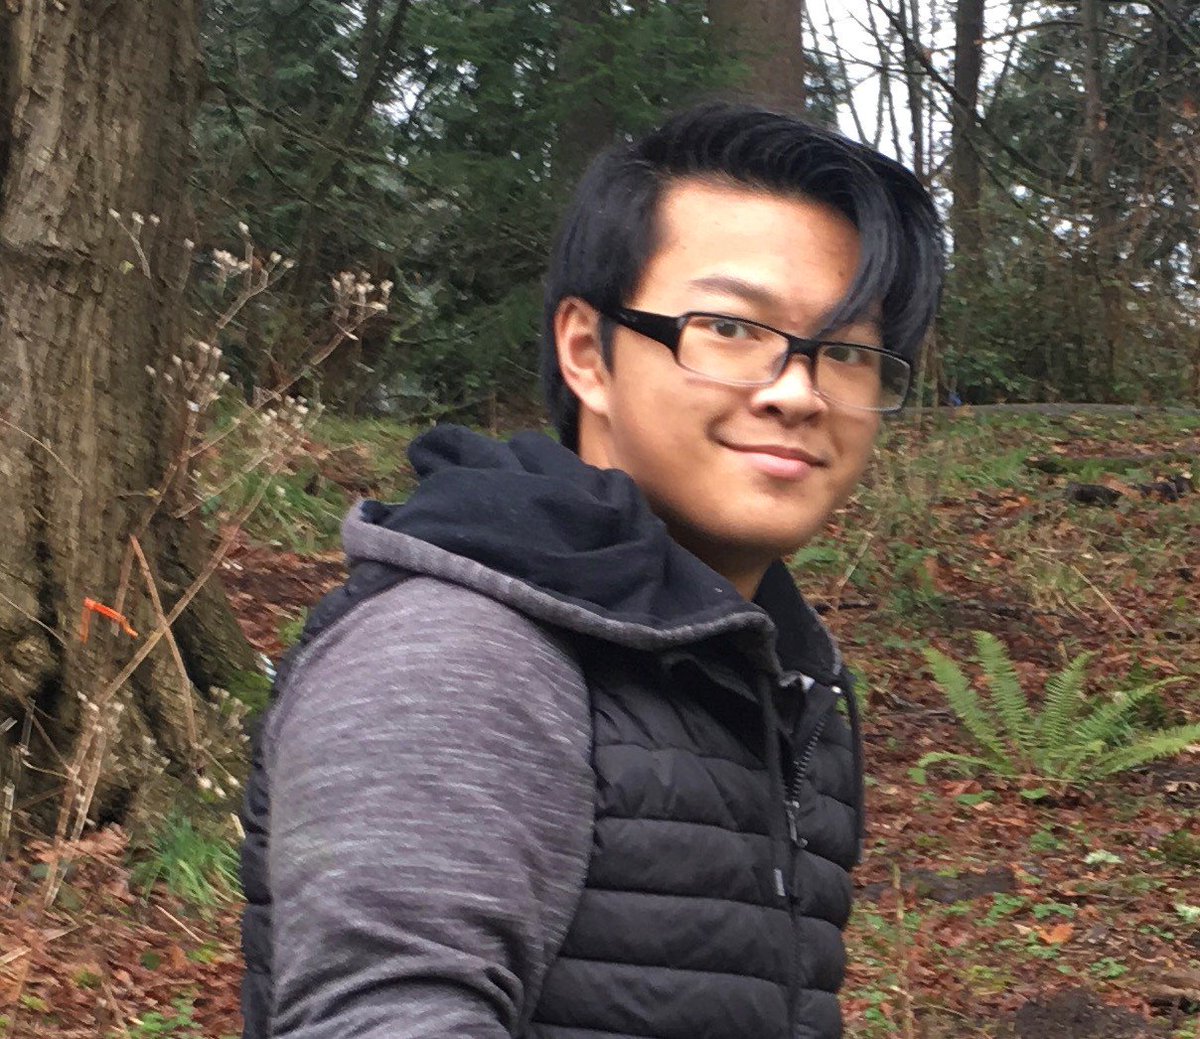 Check out this piece about one of our inspiring Tenacious Roots Teens! #conservationleaders sewardpark.audubon.org/press-release/…